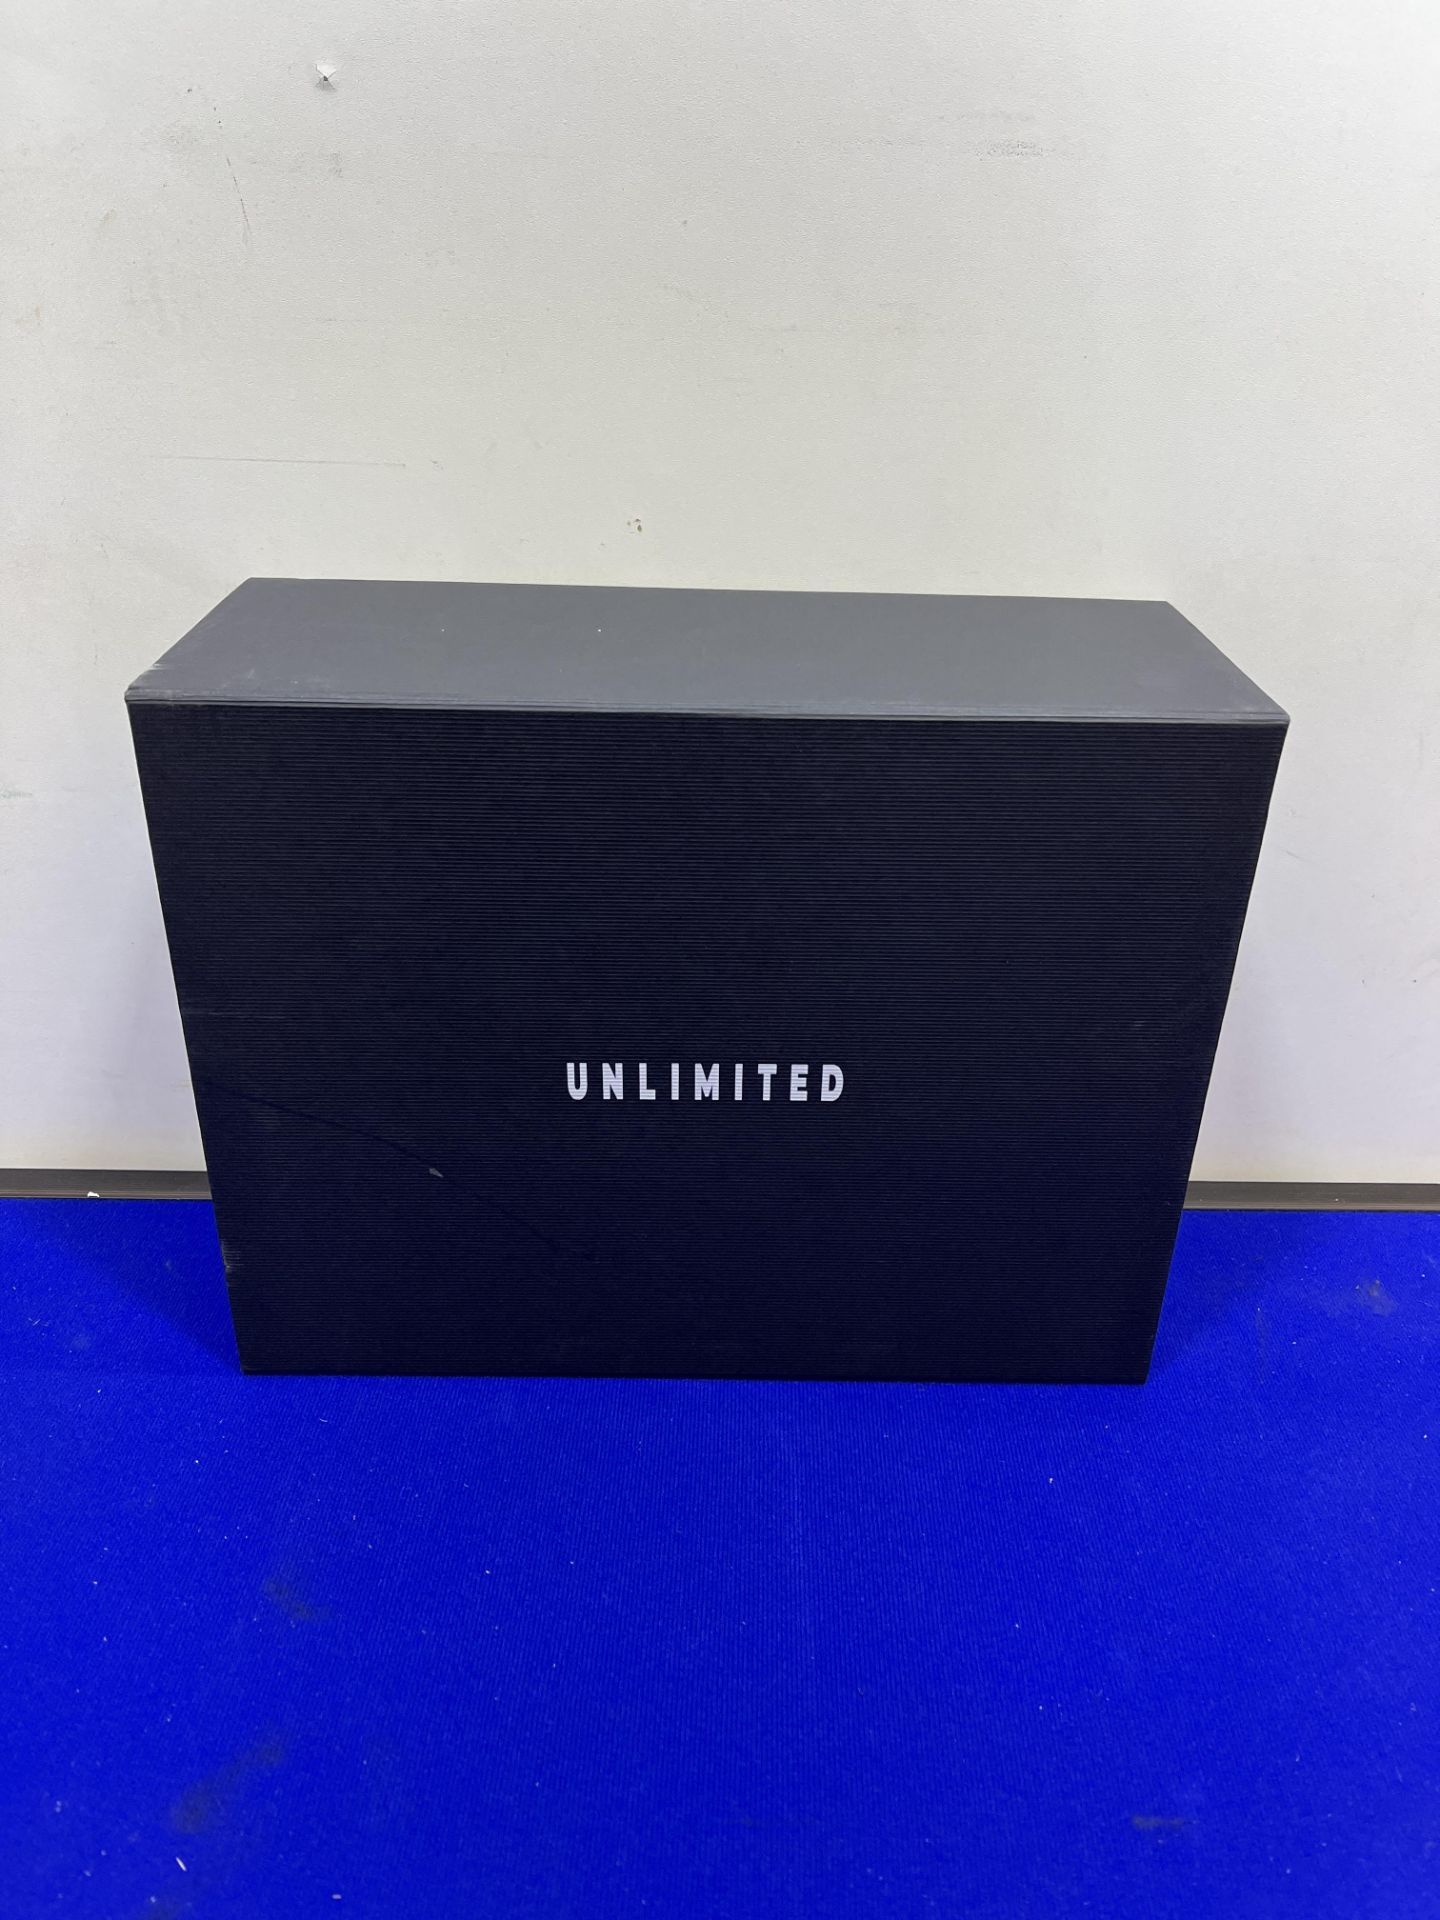 Pallet of Empty Unbranded/Branded Gift Boxes - Image 7 of 7